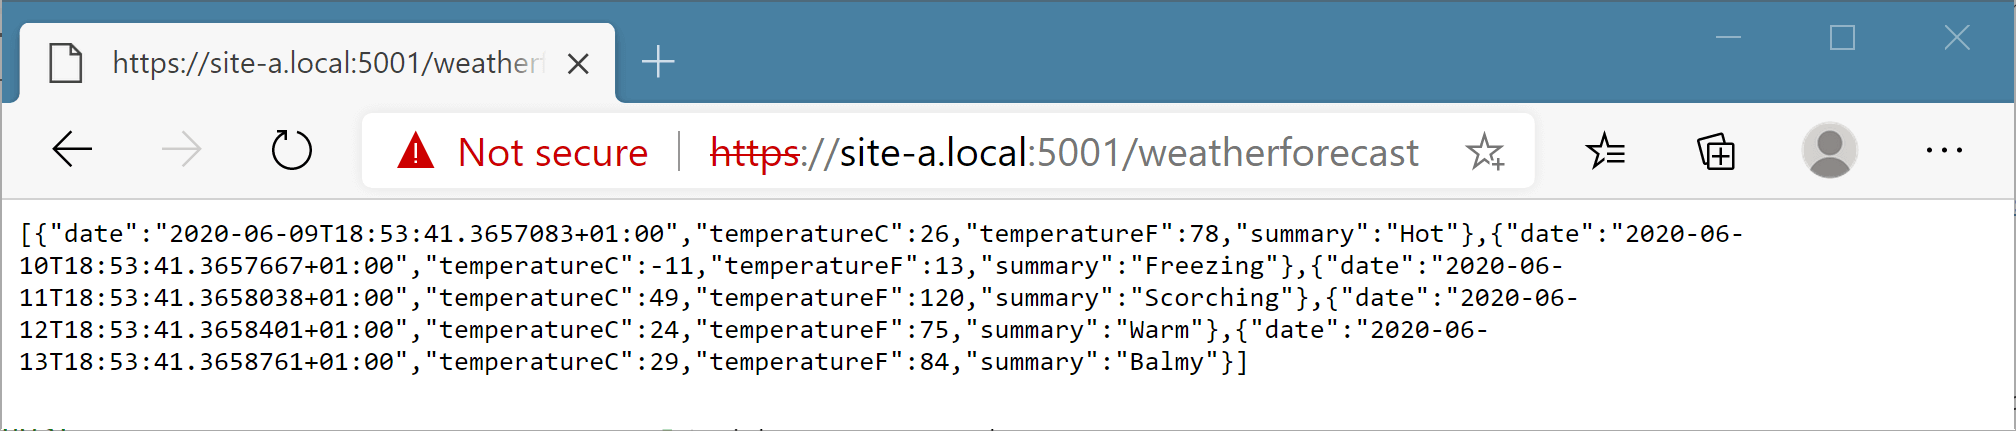 Image of accessing the site using the site-a.local domain